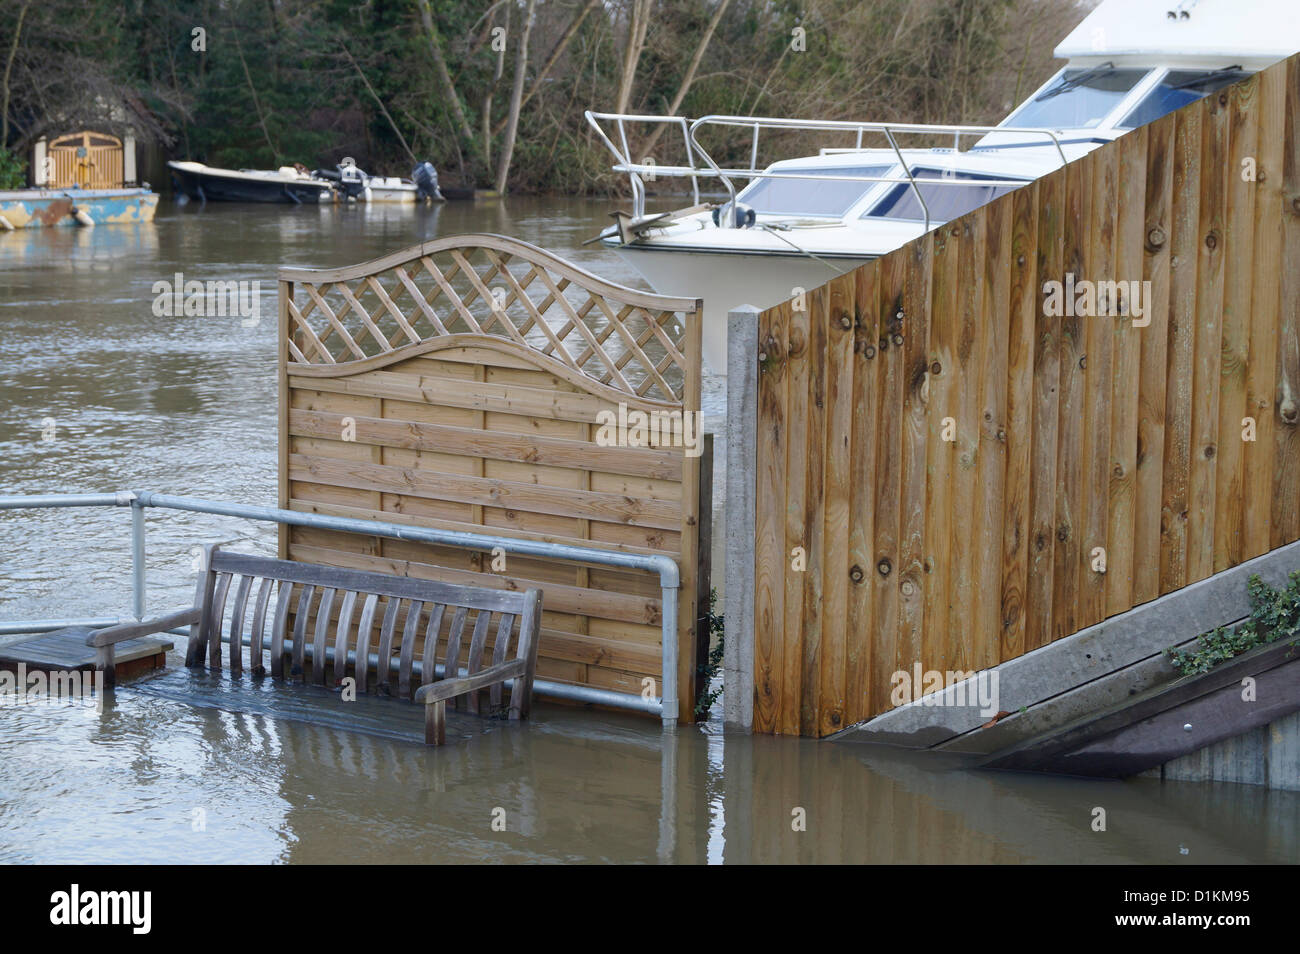 Thames Ditton, UK. 27th Dec, 2012. River Thames flooding at Thames Ditton Stock Photo